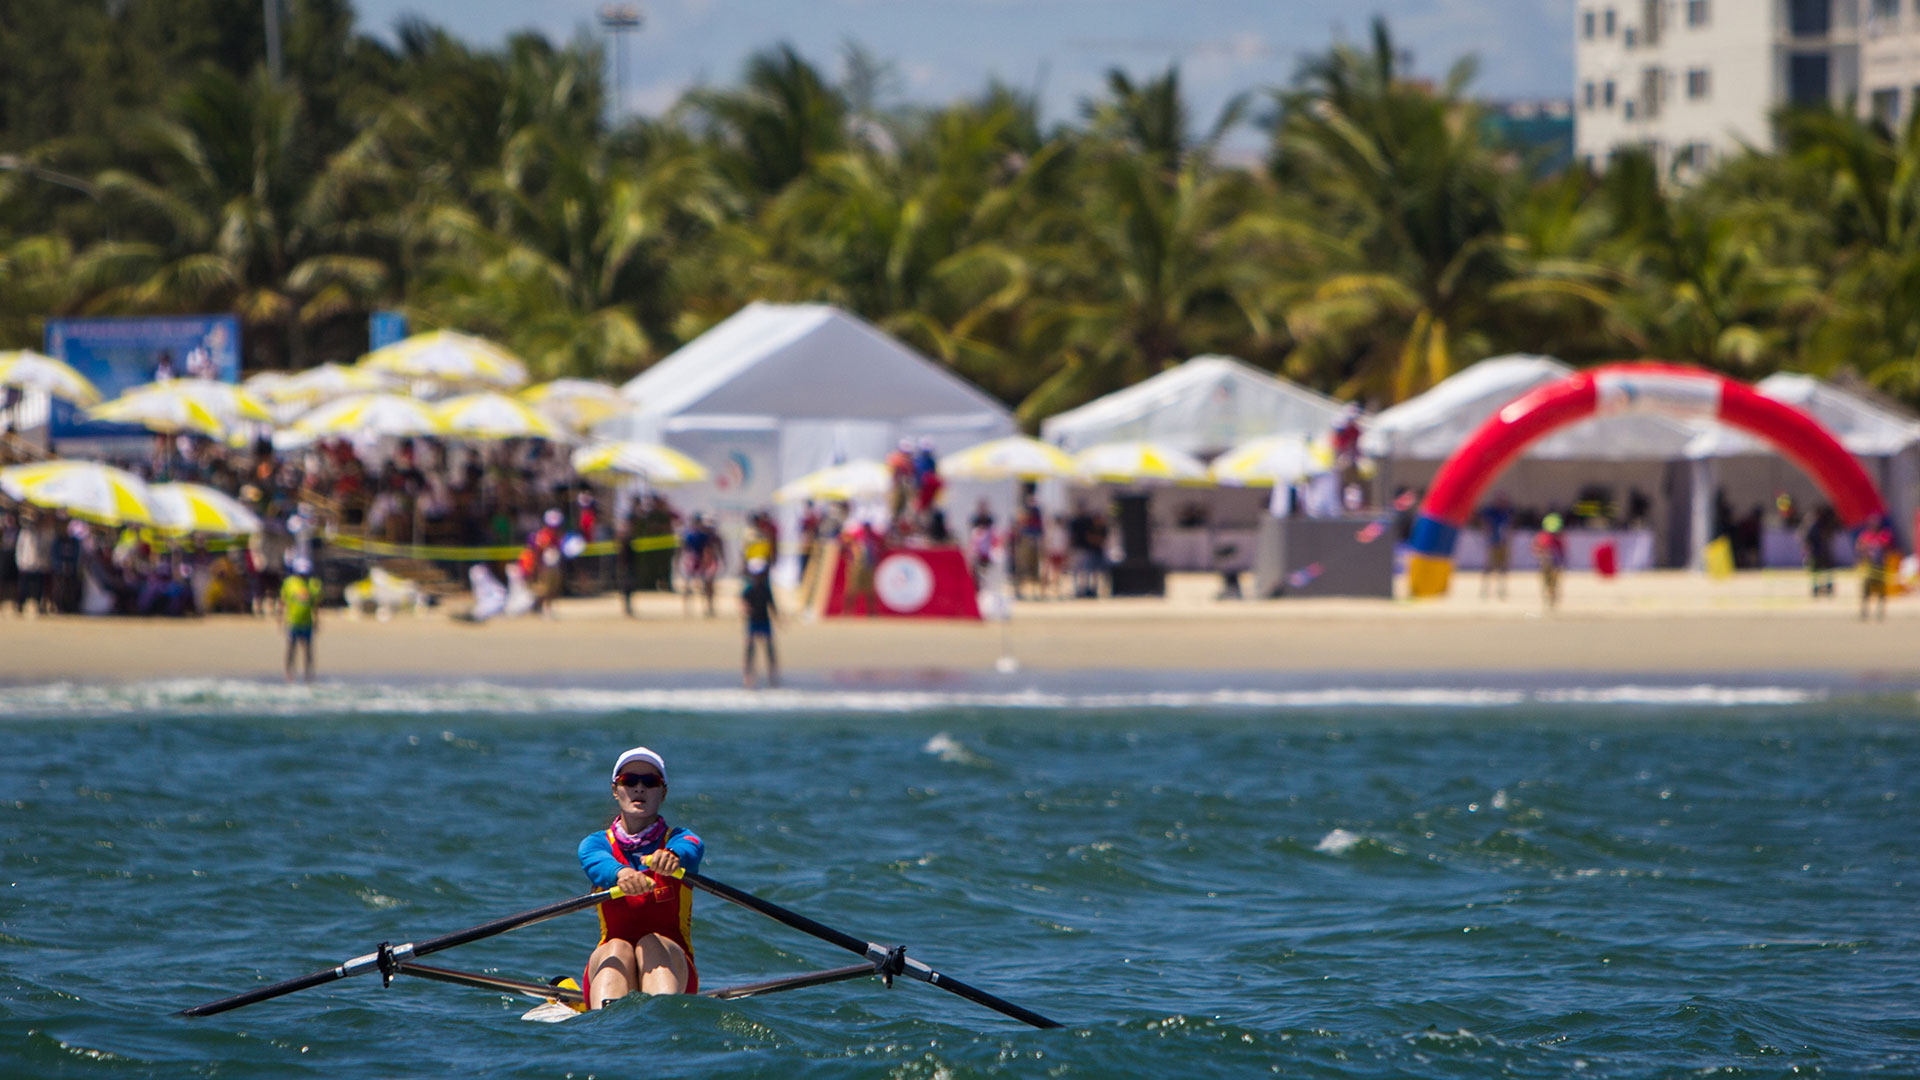 Rowing (Beach sprint and surfing) will be among four new sports contested at the Bali 2023 ANOC World Beach Games (ANOC)